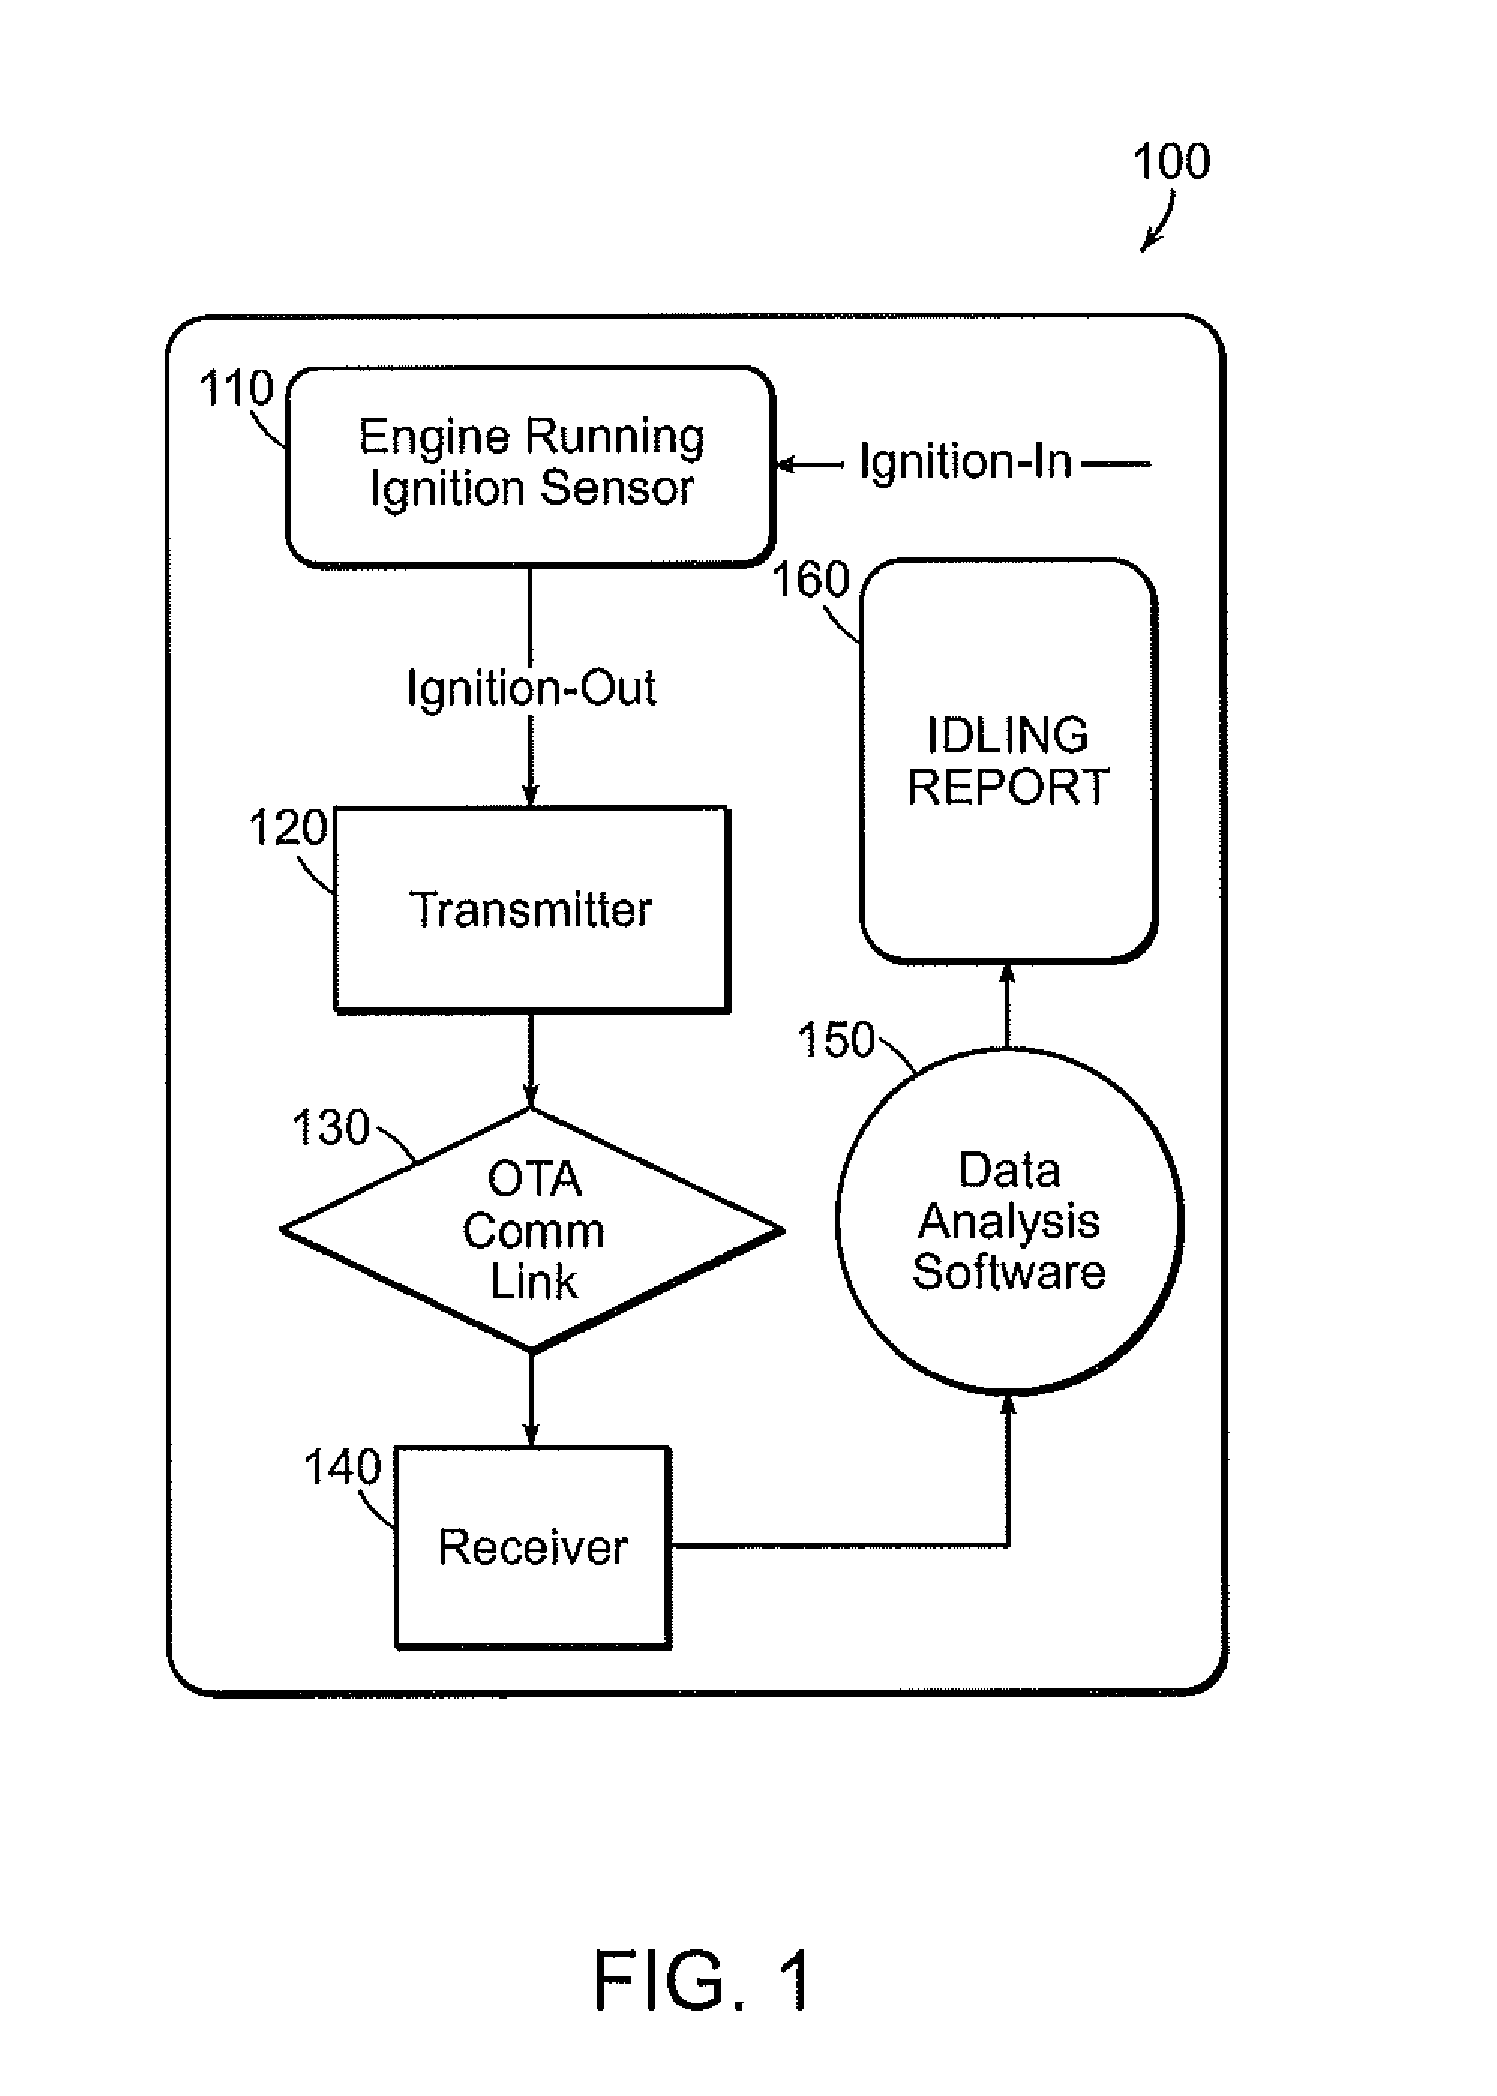 Systems, devices and methods for detecting engine idling and reporting same